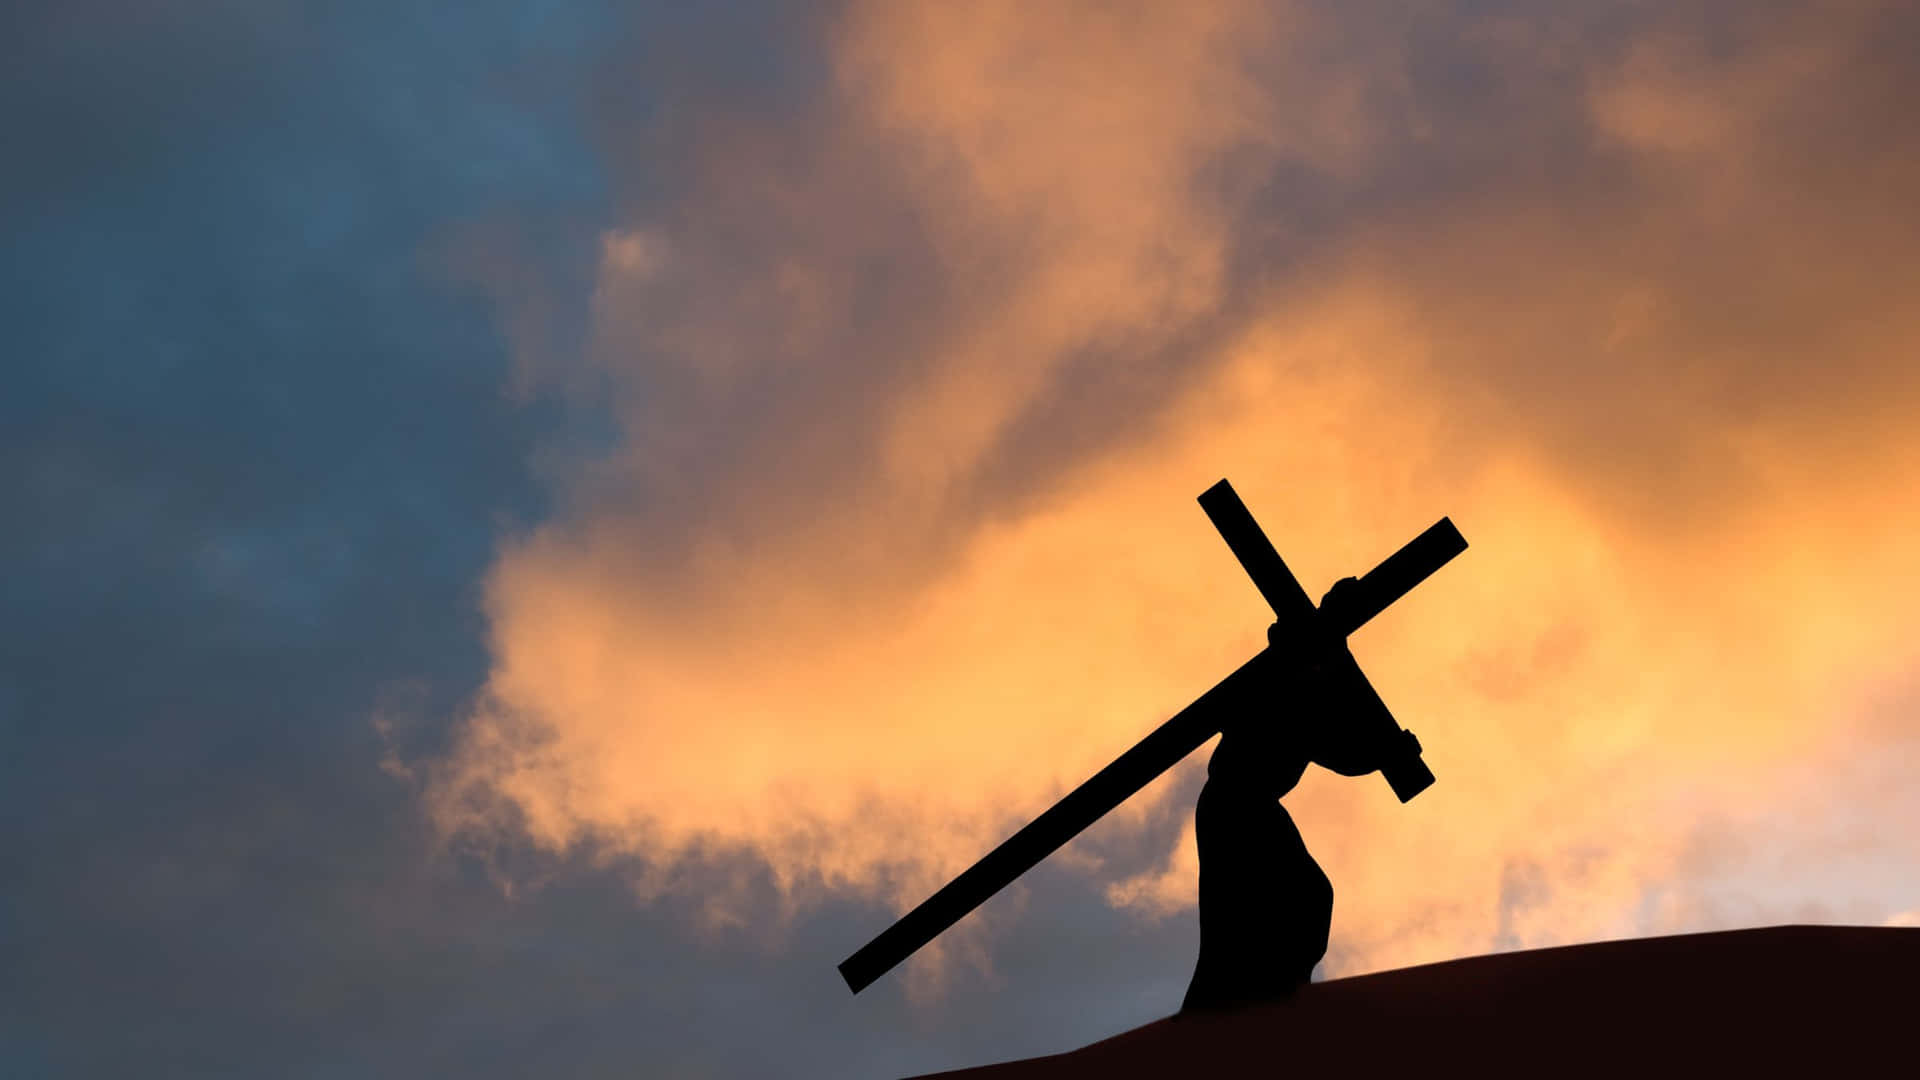 "Christians around the world commemorate Good Friday with solemn observances."